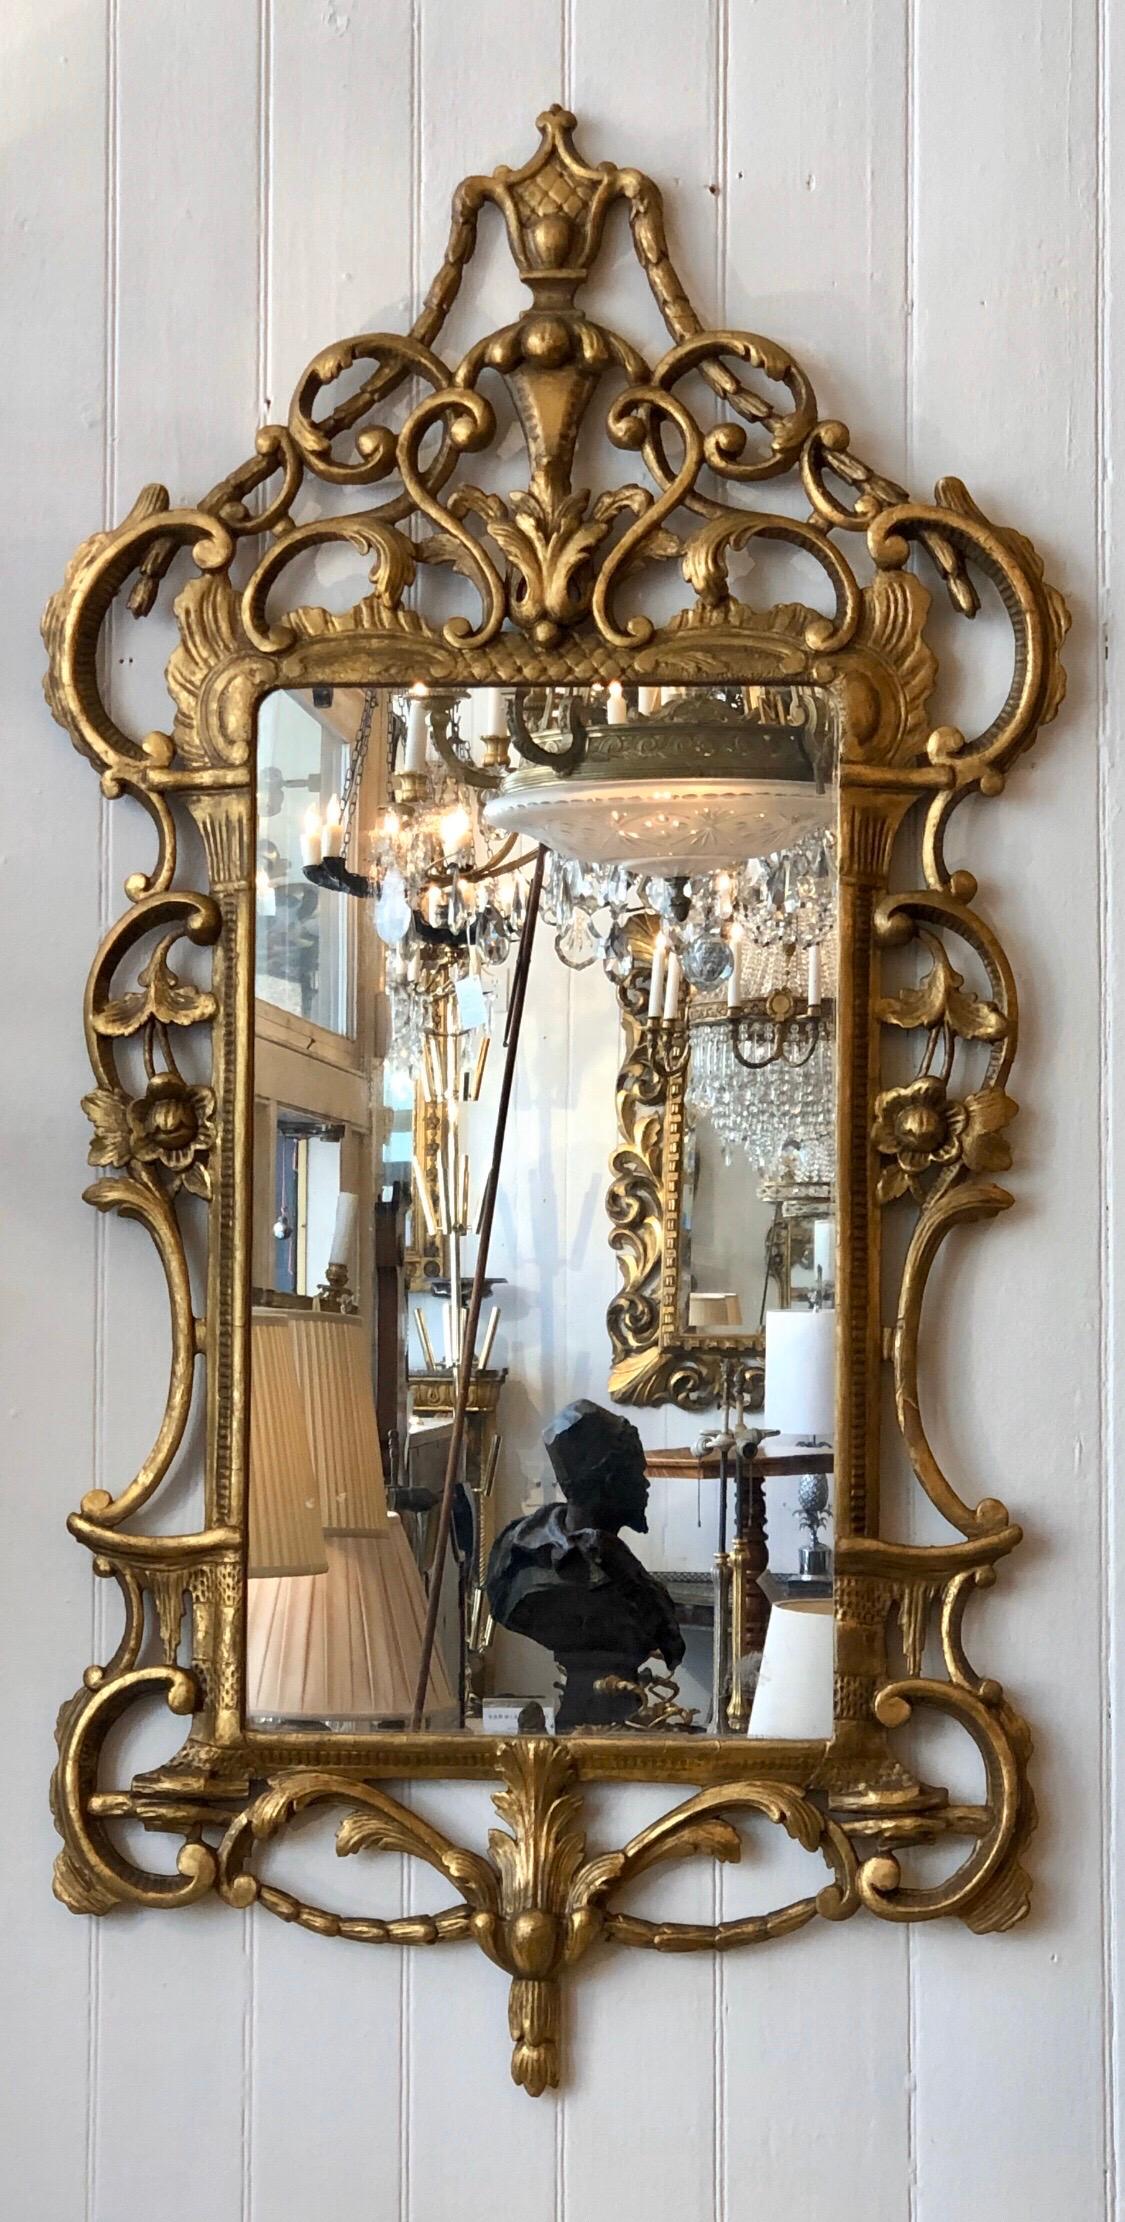 The George III mirrors have Chippendale chinoiserie influences going into the Adams taste. The gilded wood frame has an urn finial ornament crest with bell-flower garlands coming down to cabochon on the corners. The looking glass is framed with